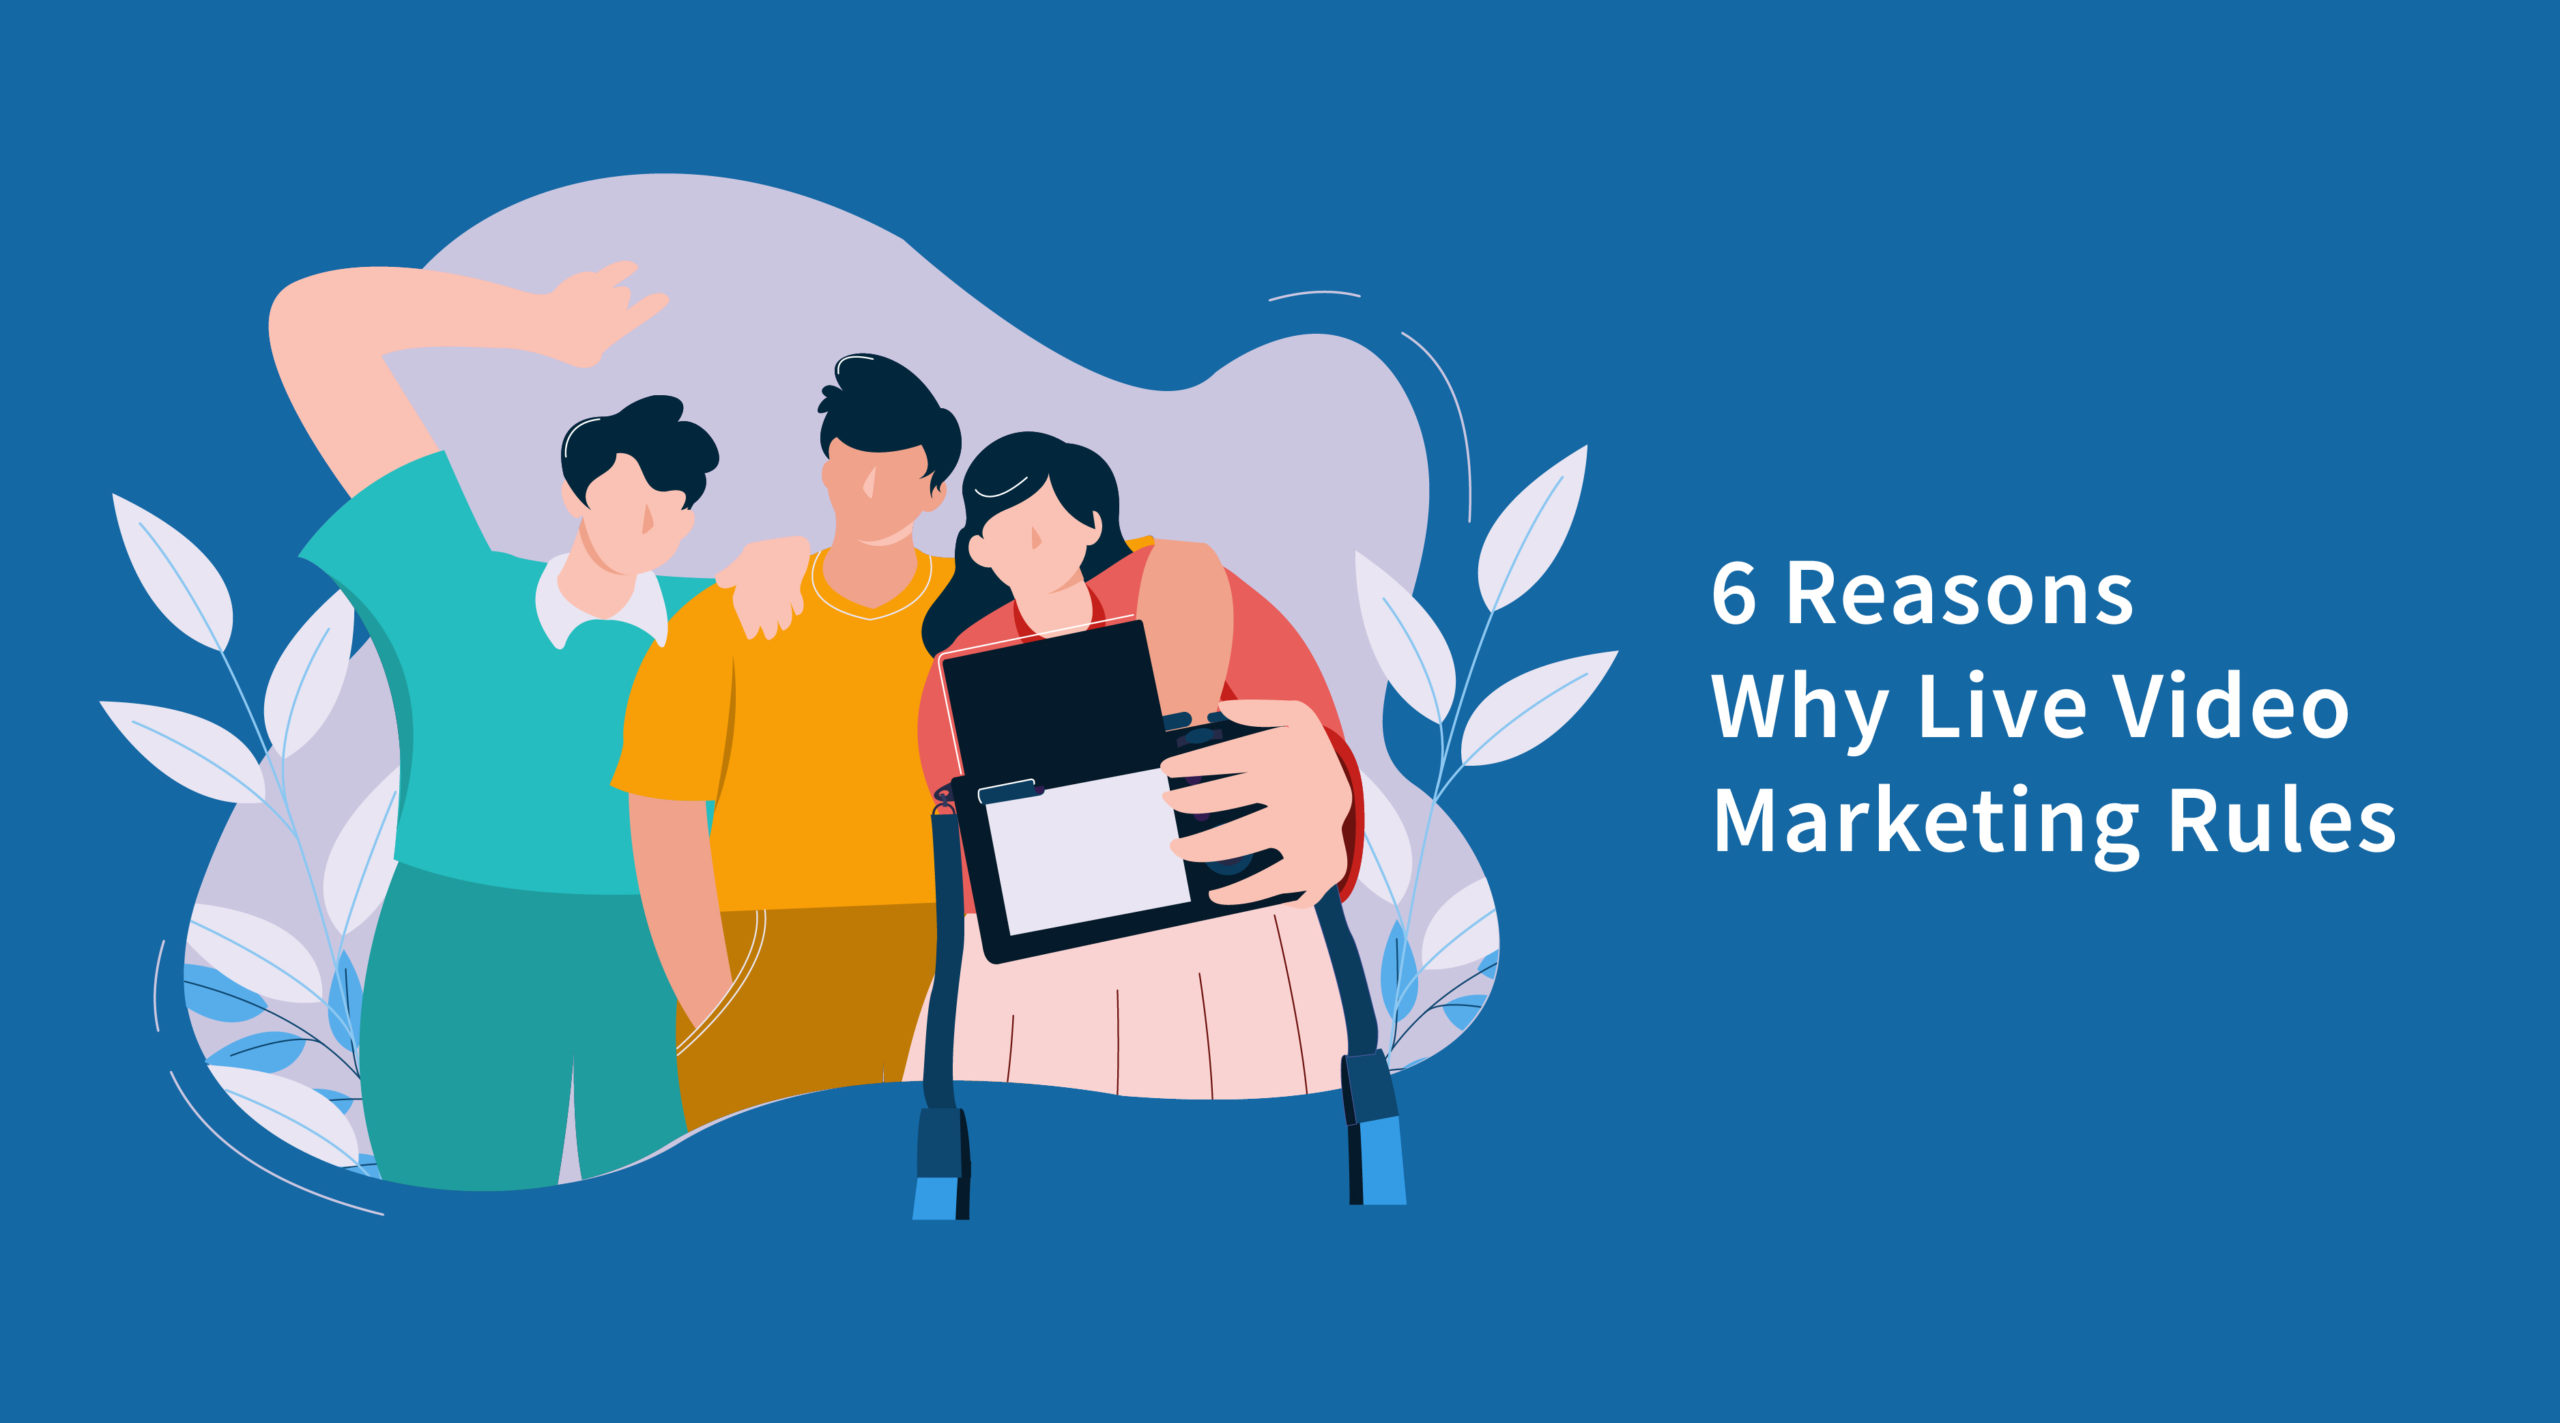 6 Reasons Why Live Video is Perfect for SaaS Marketing